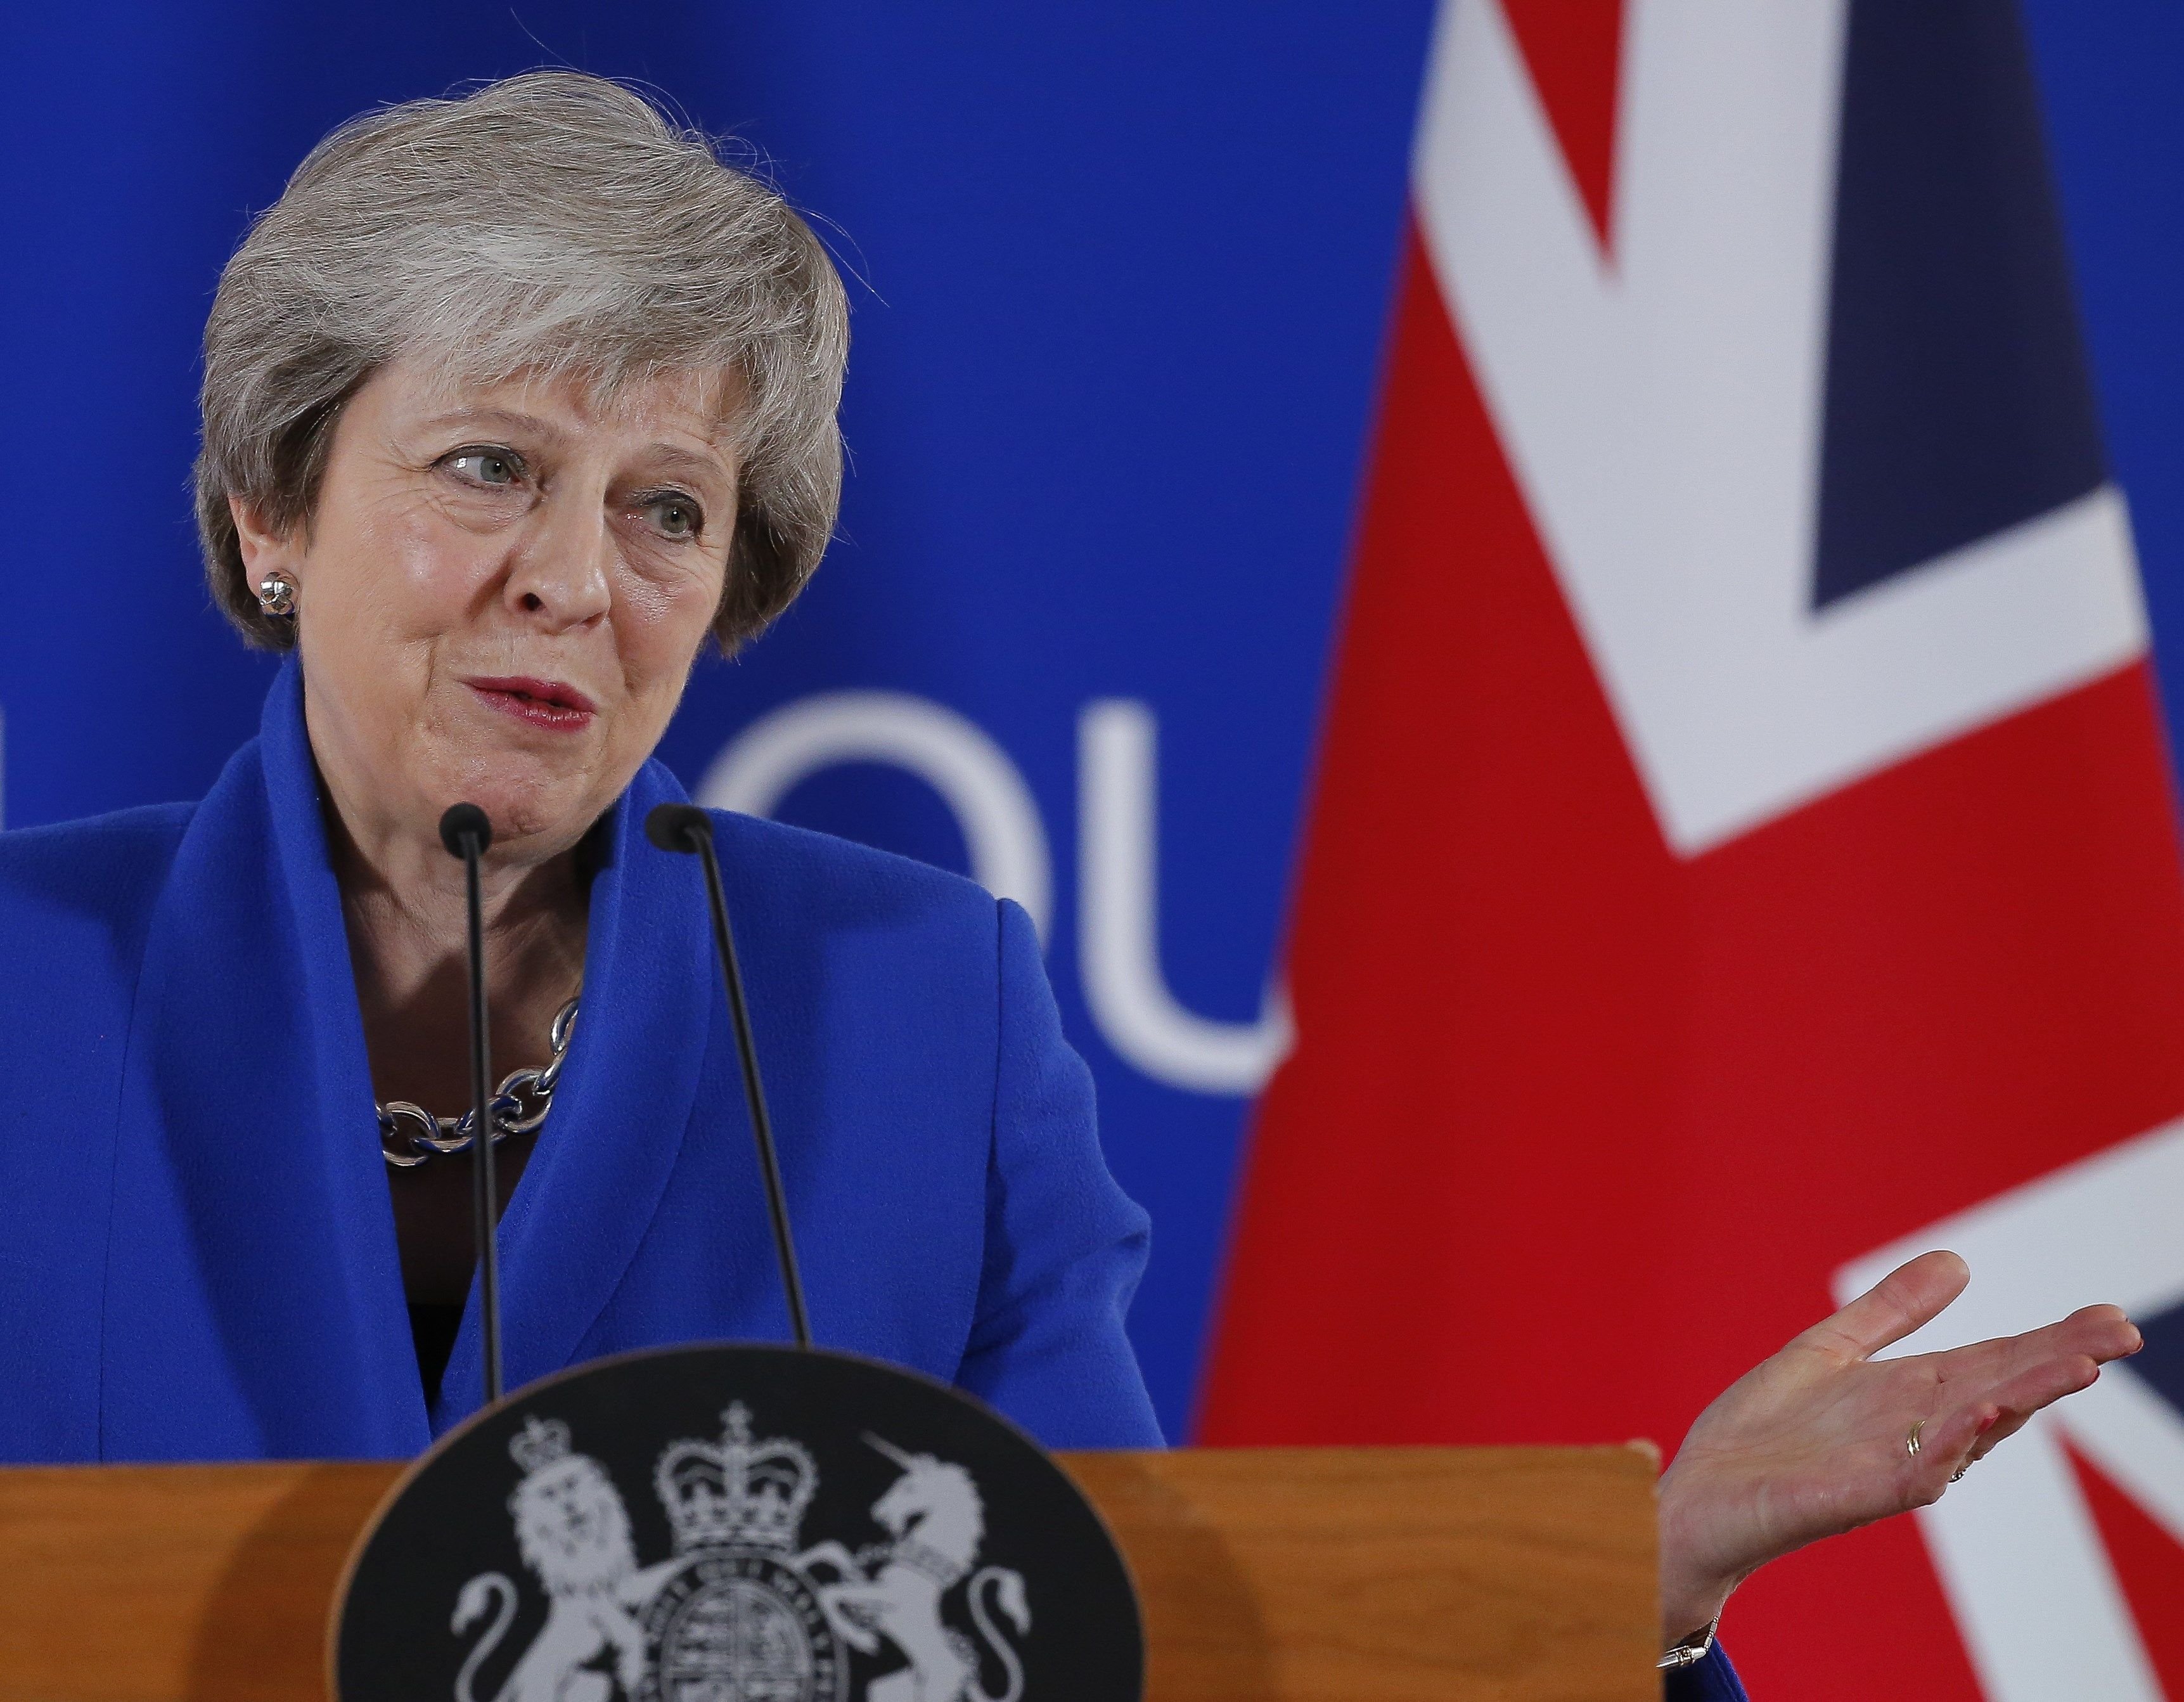 Sovereignty of Gibraltar won't change, says May, defending success of Brexit deal